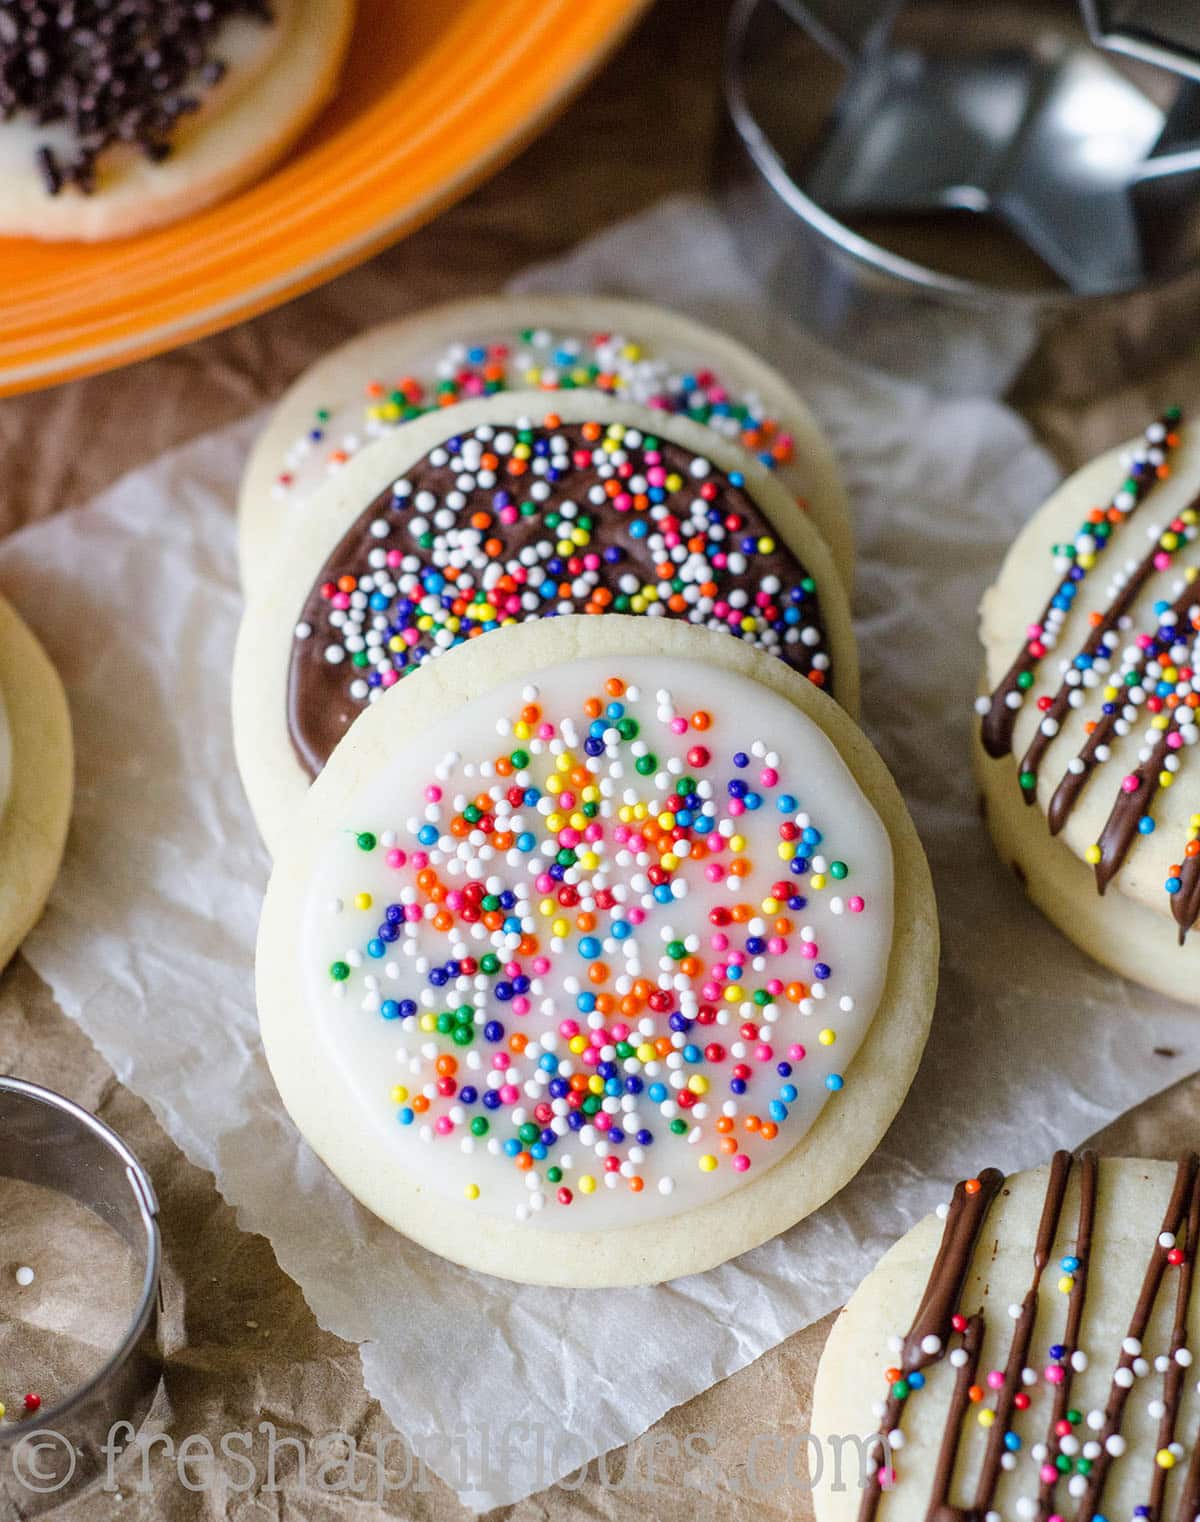 cut-out sugar cookies with icing and nonpareil sprinkles